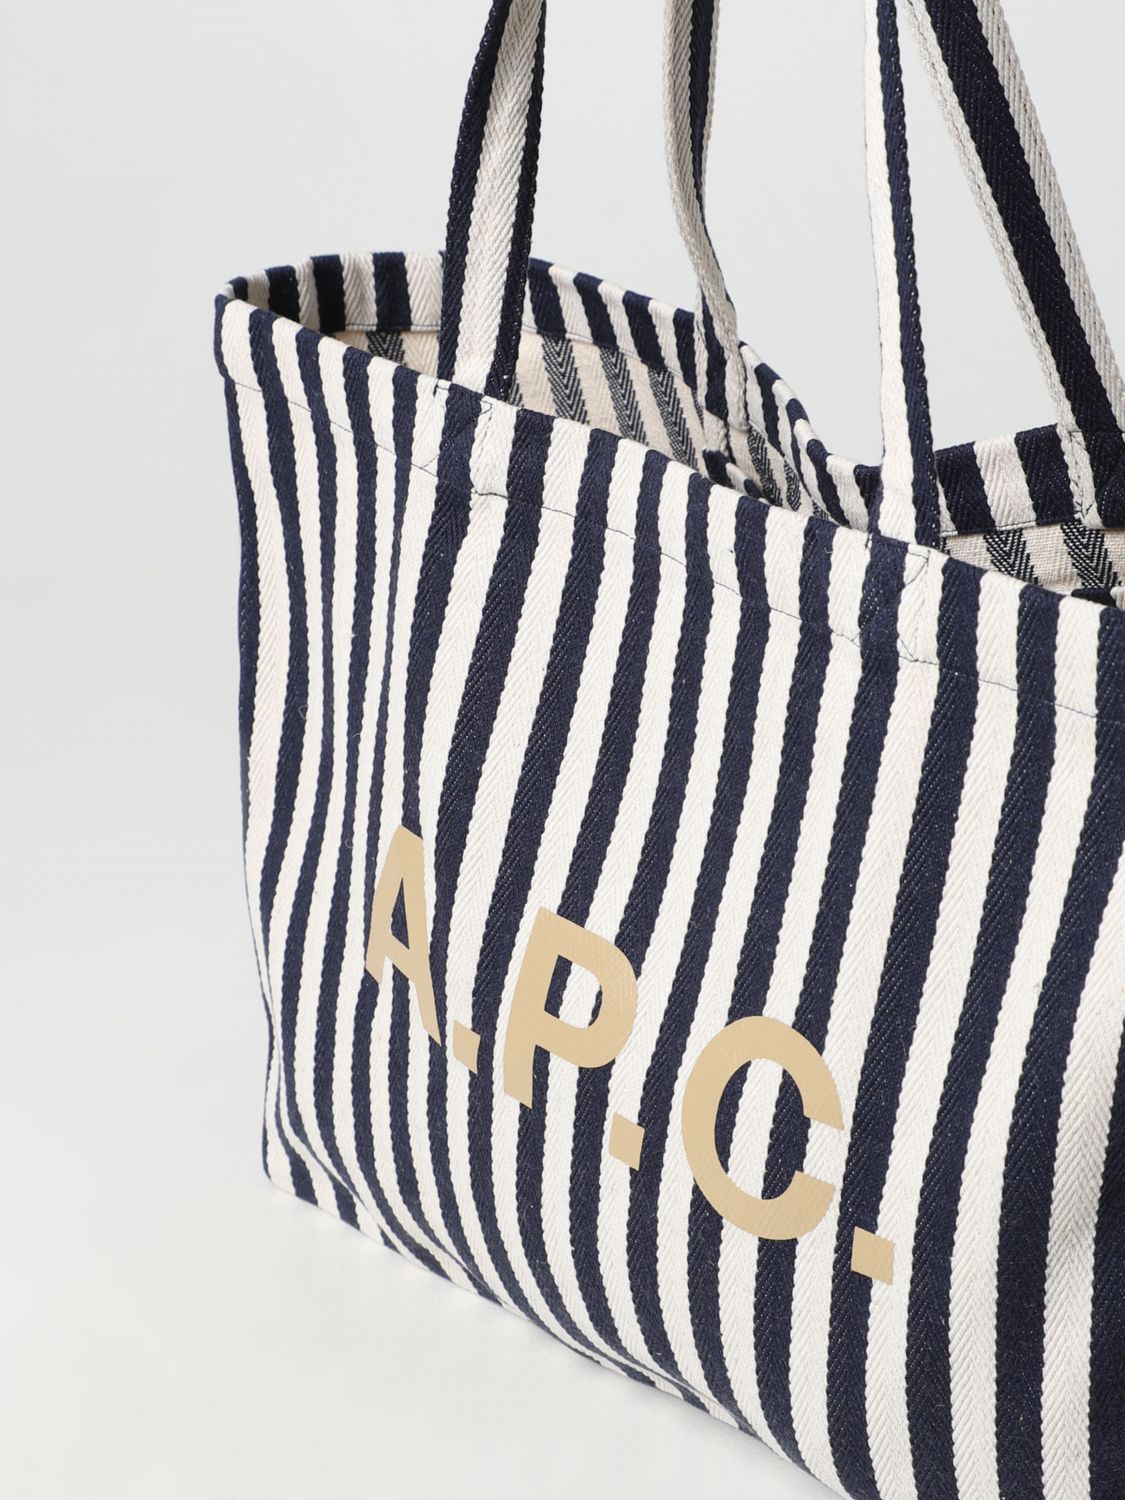 A.P.C.: tote bags for woman - Blue  A.p.c. tote bags COGXCM61443 online at